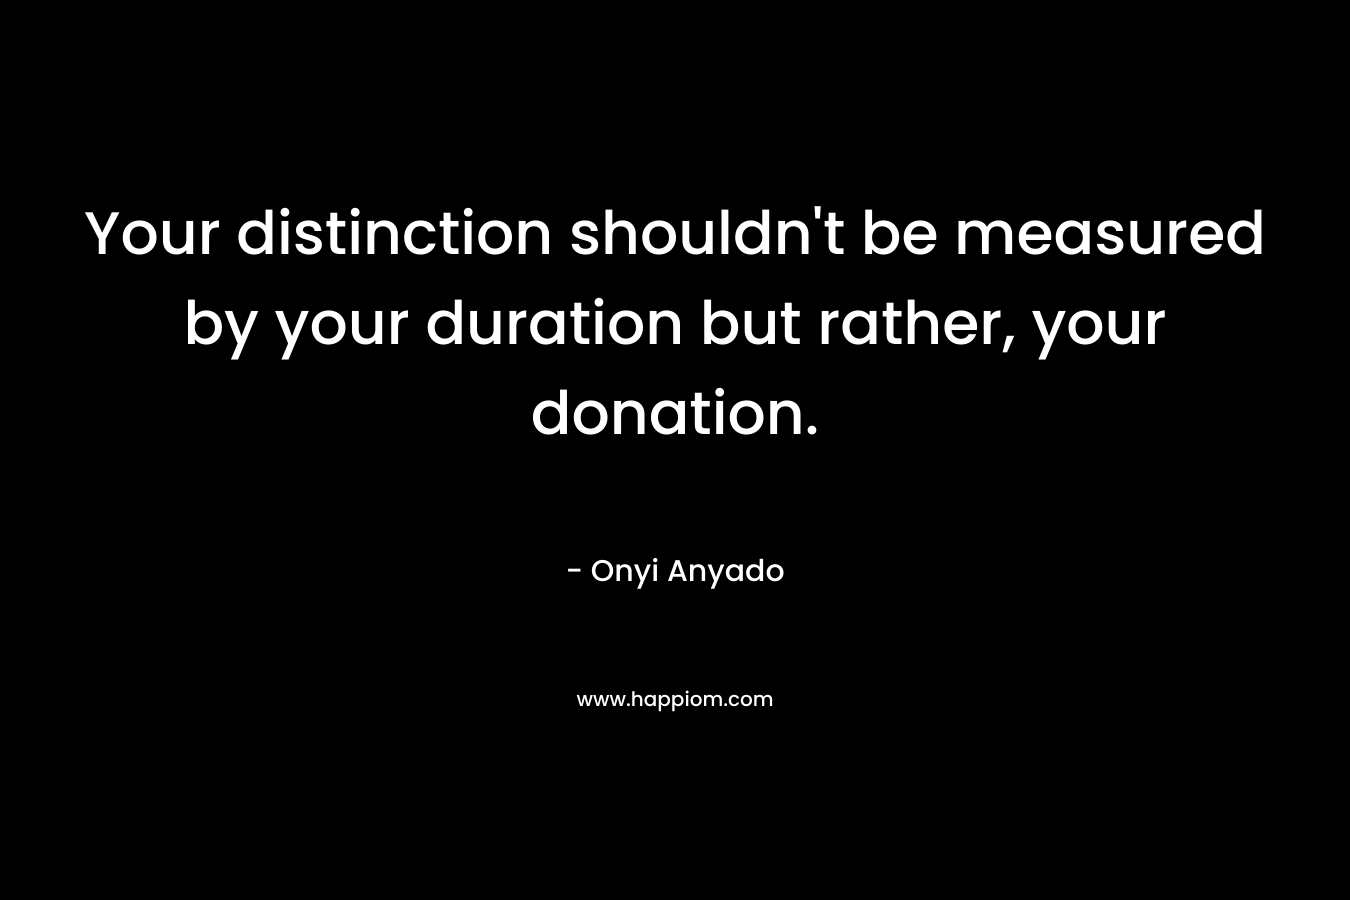 Your distinction shouldn’t be measured by your duration but rather, your donation. – Onyi Anyado